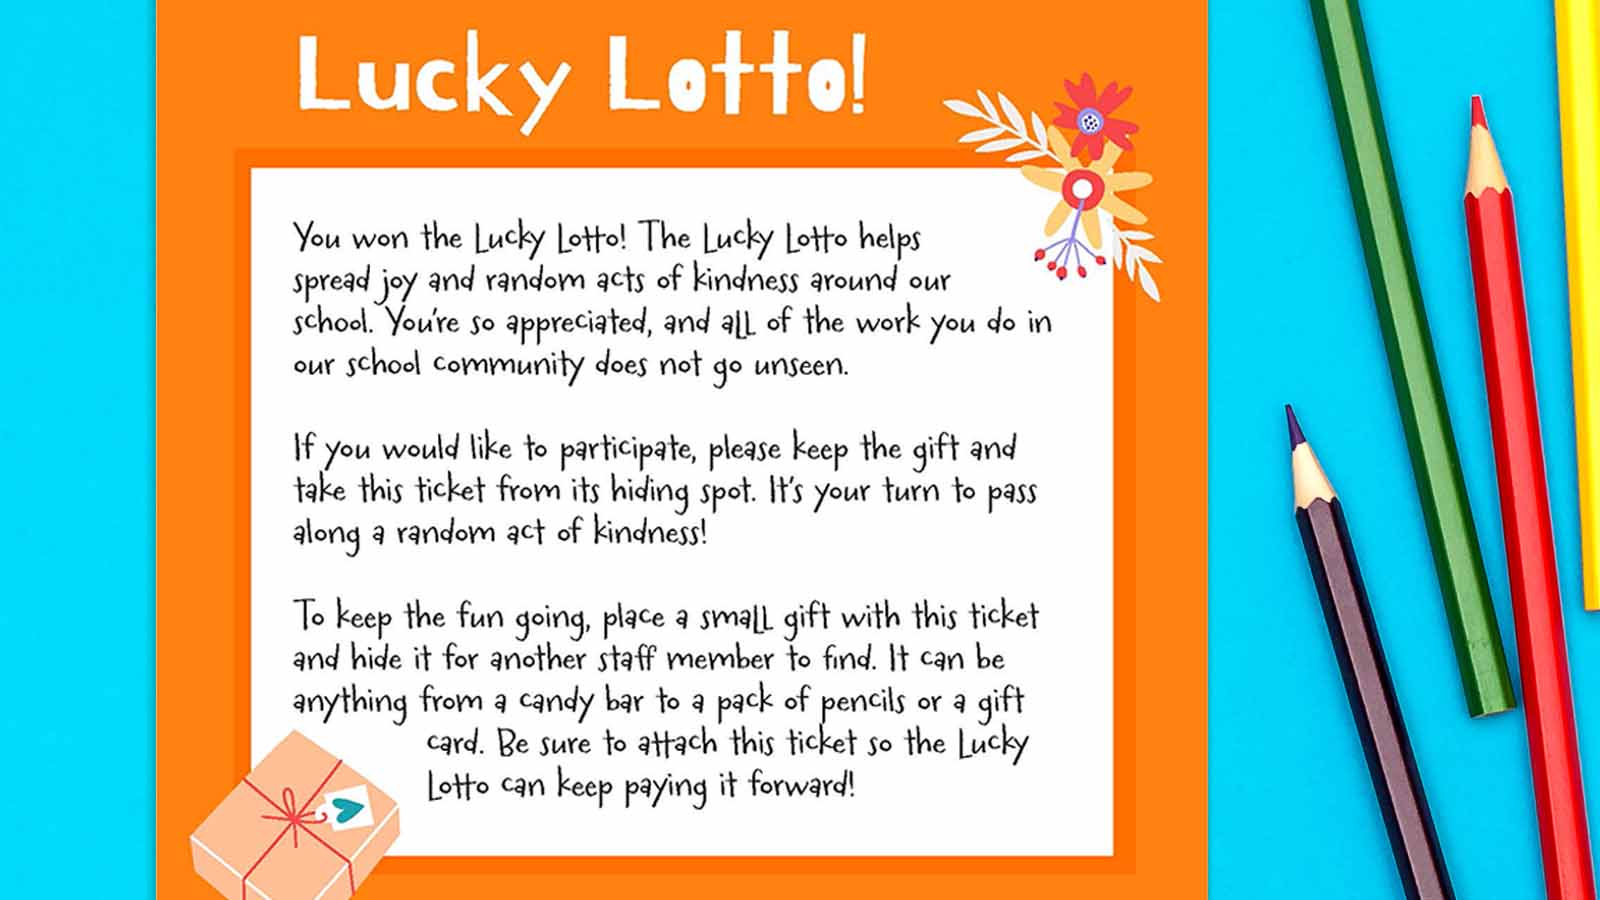 Lucky lotto ticket on a teal background with multiple colored pencils.